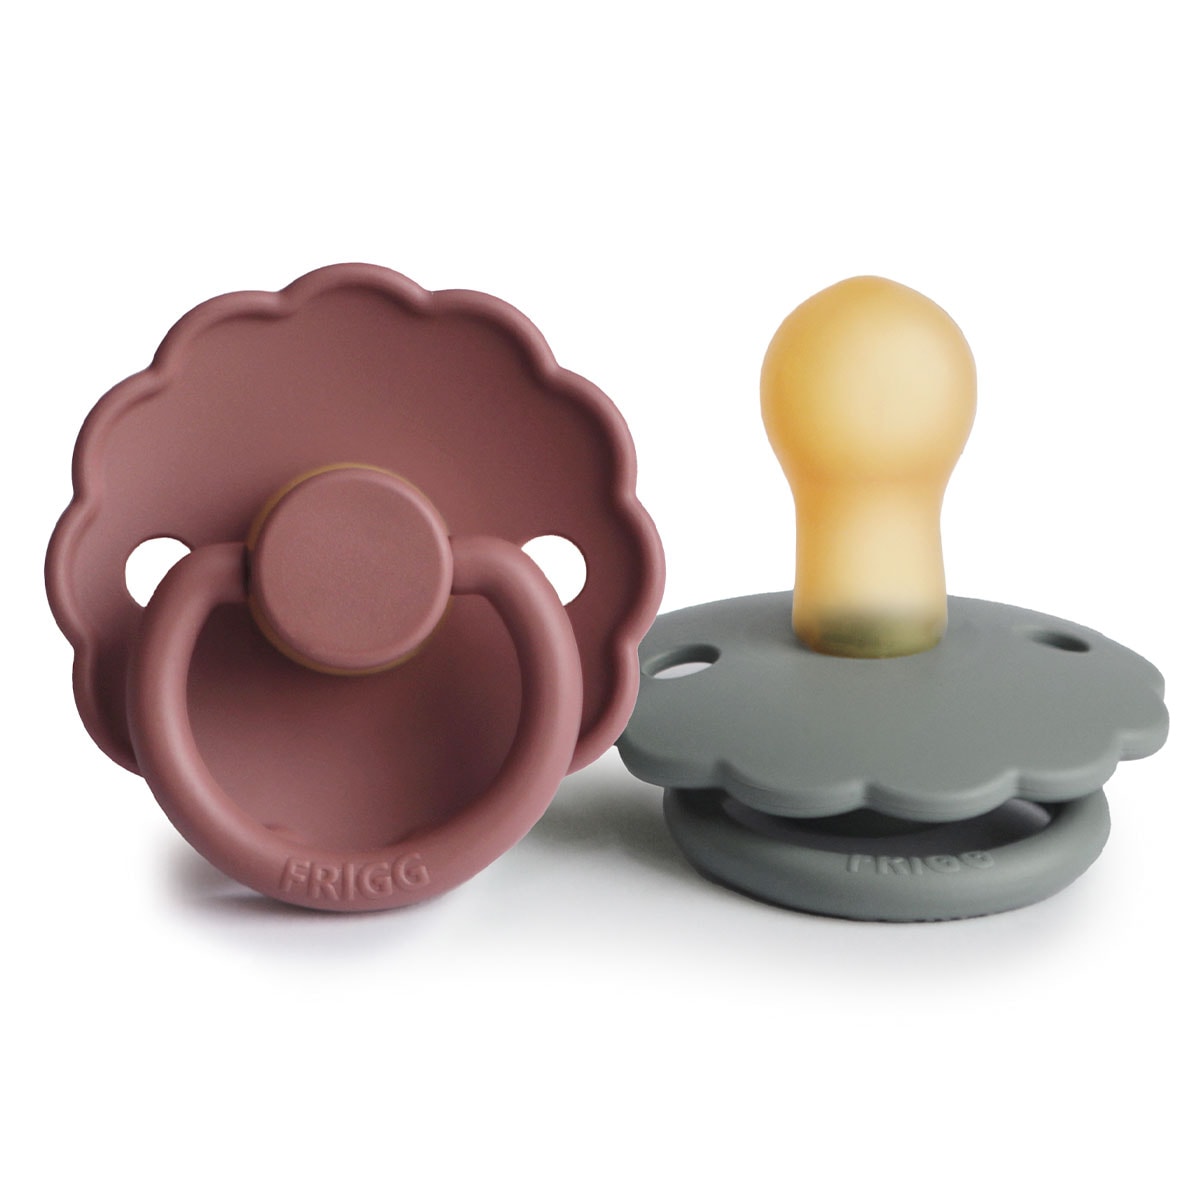 FRIGG 0-6 Months Daisy Pacifier French Gray/Woodchuck 2 Pack